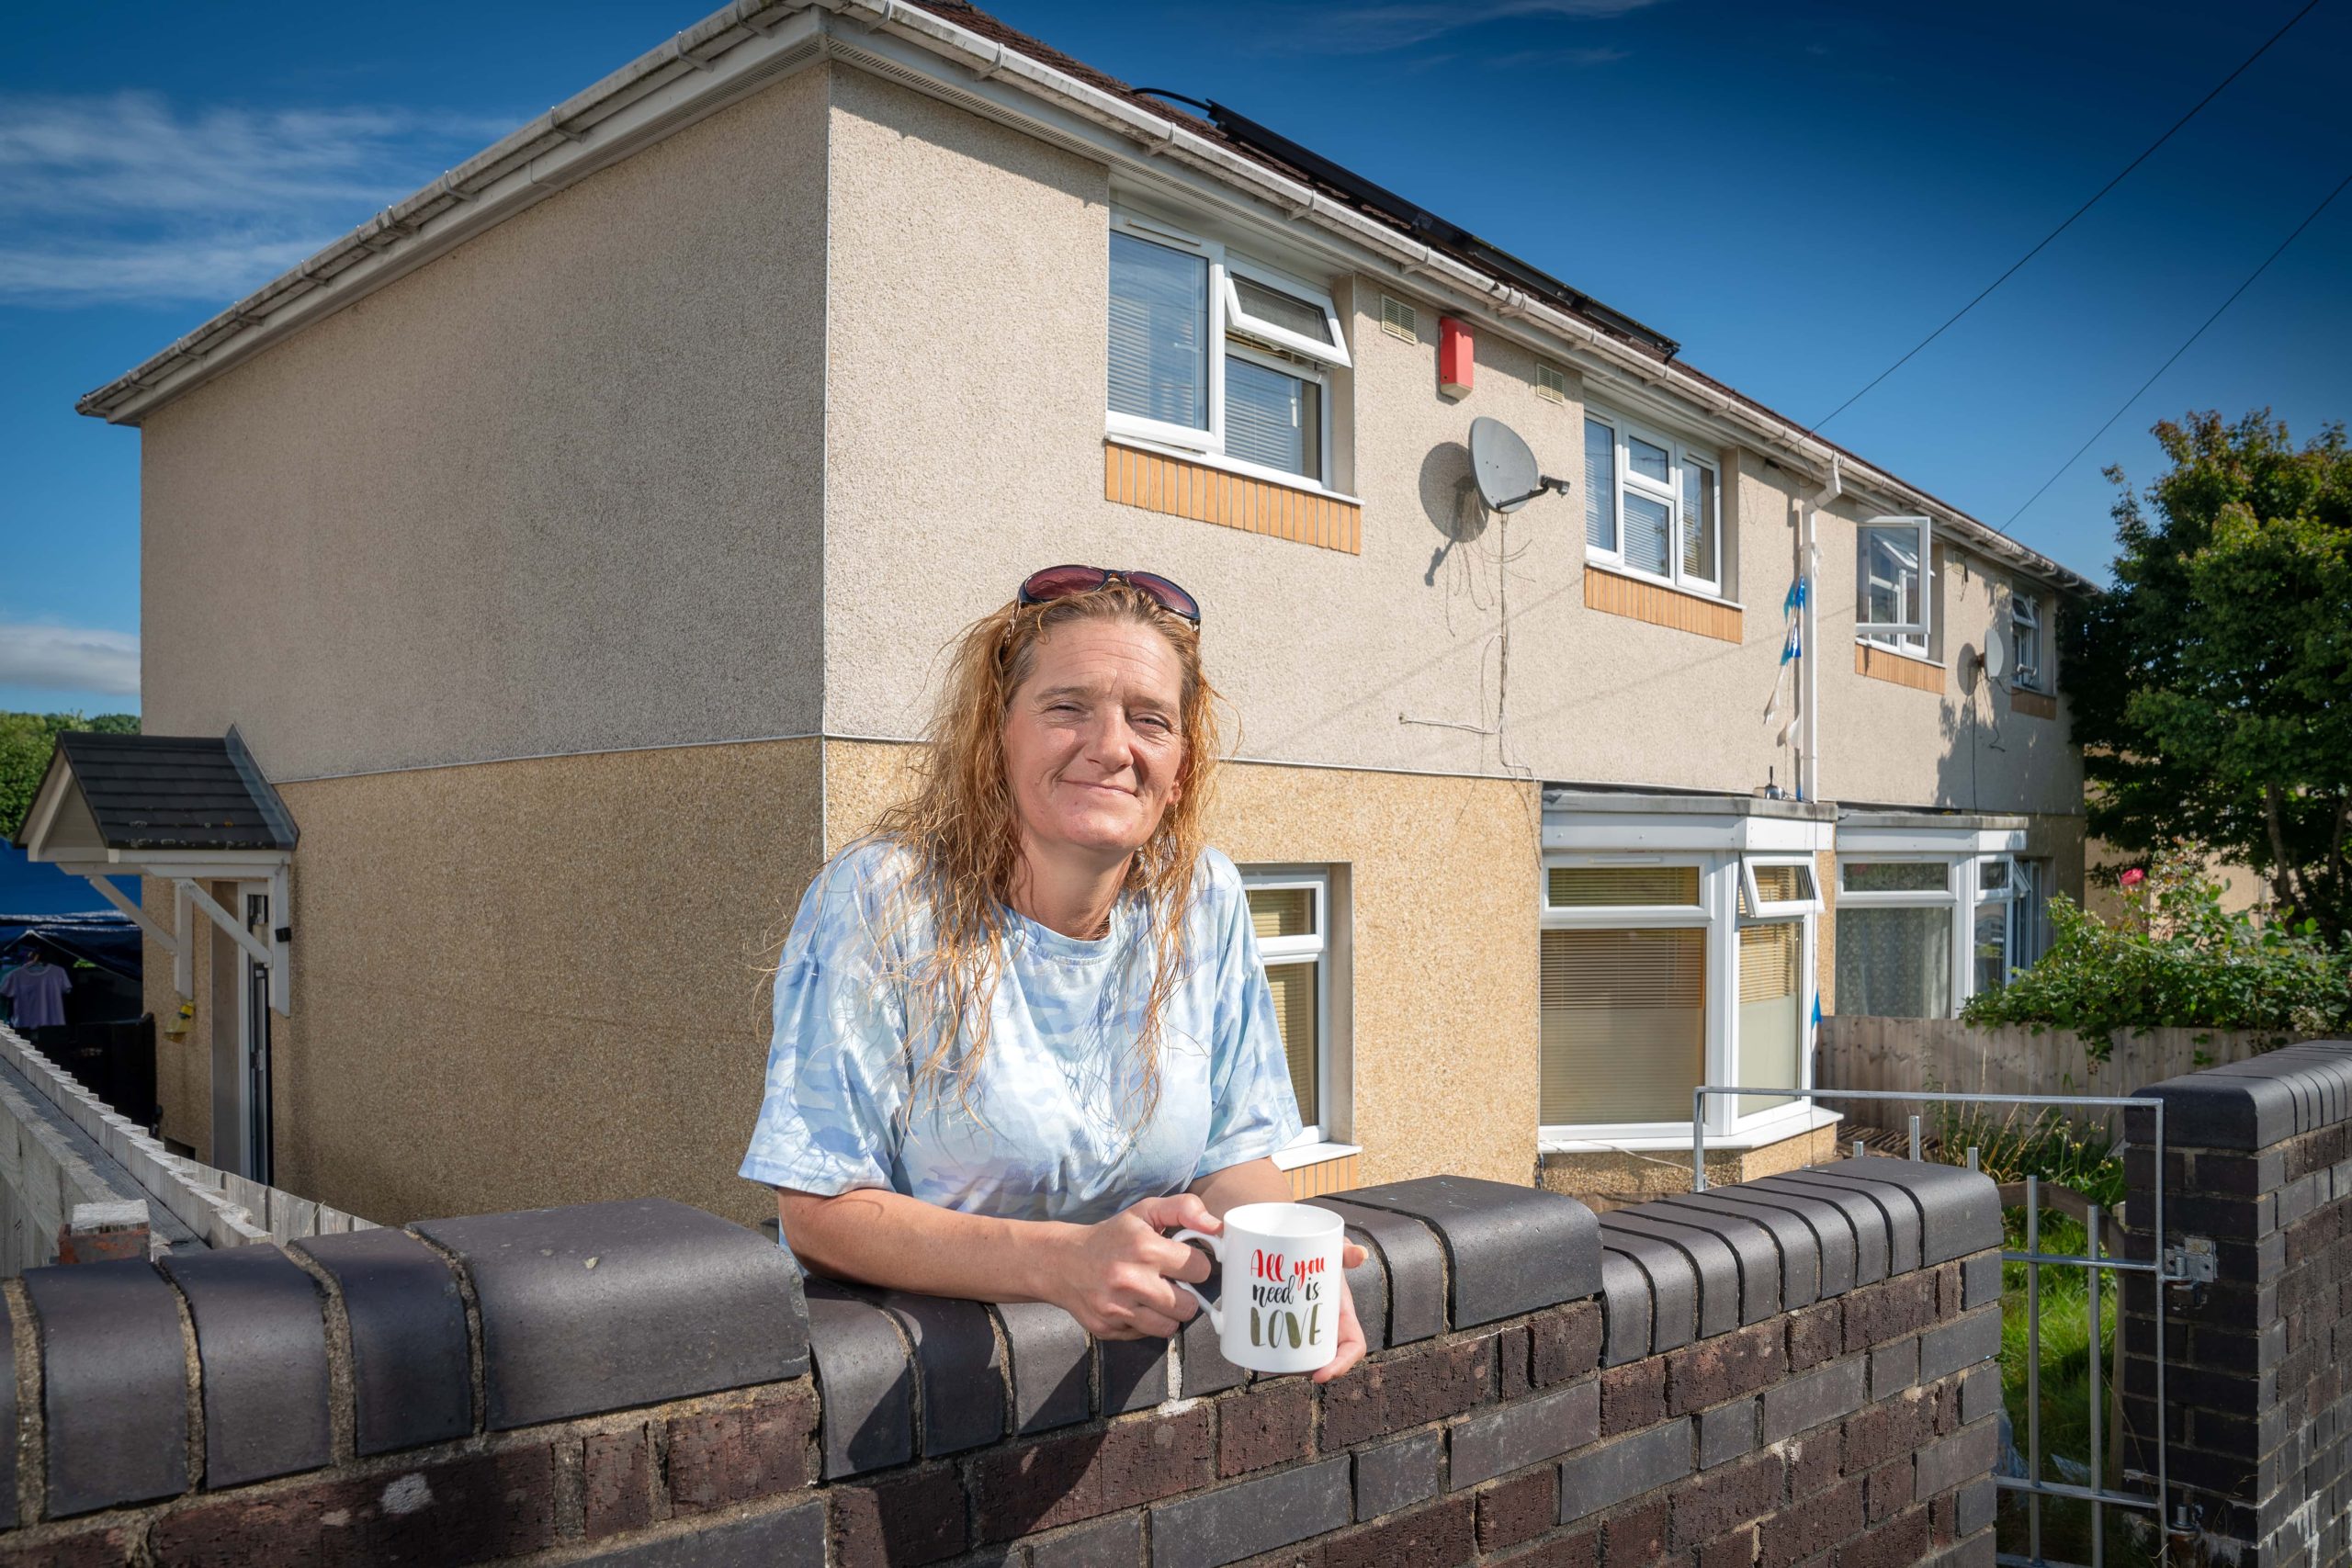 Trivallis Housing Landlord Wales A woman leaning on a brick fence in front of a Trivallis residential building, holding a mug and smiling at the camera.